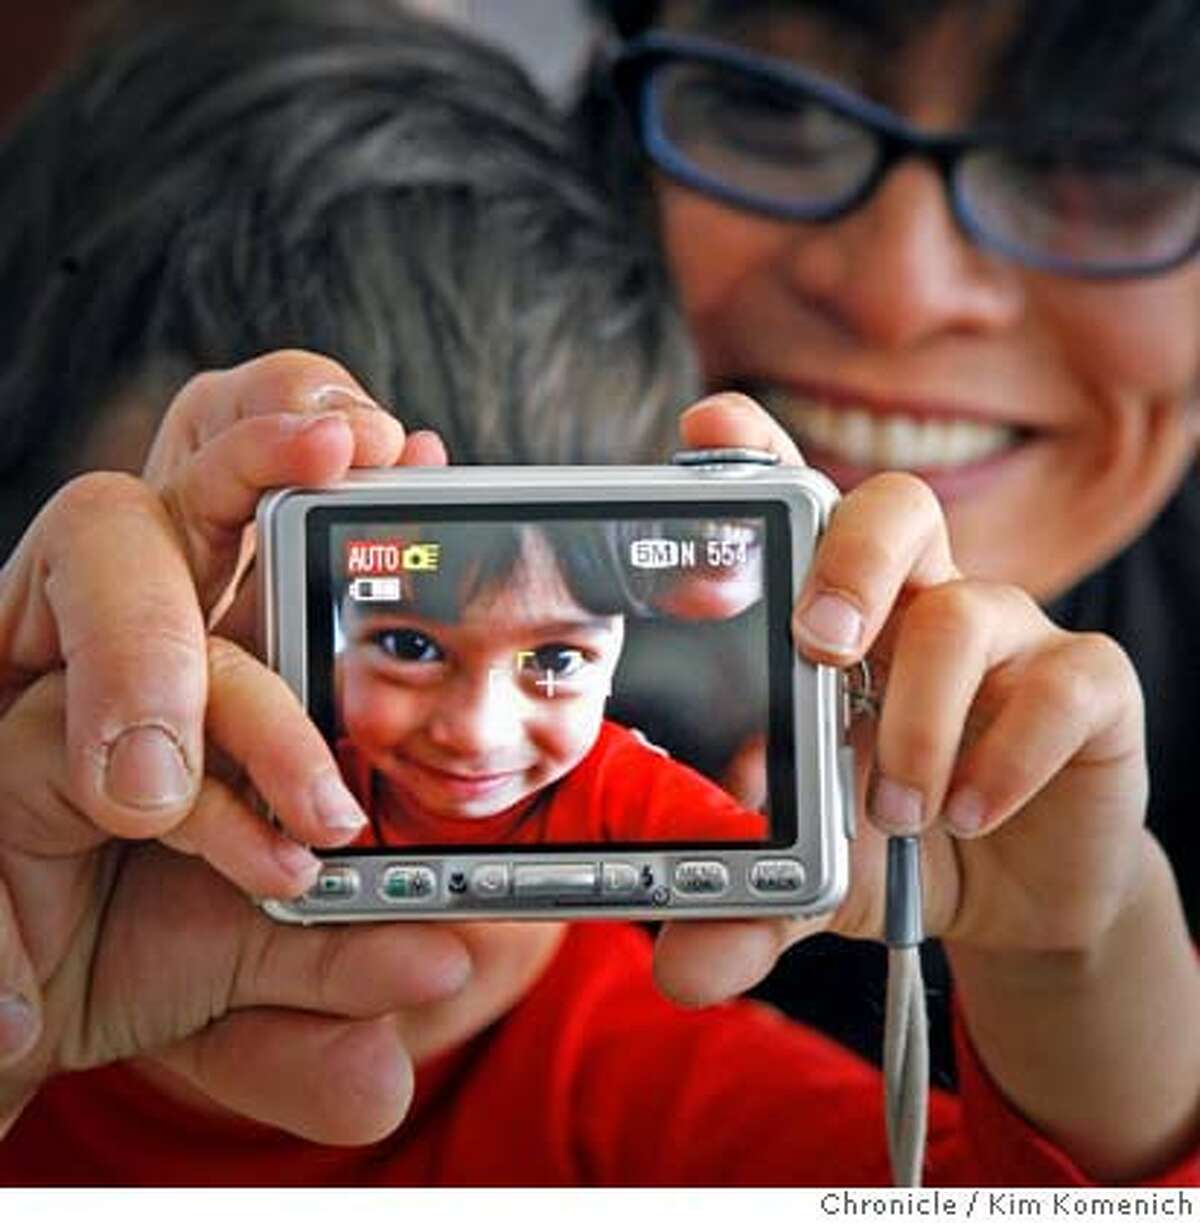 DIGITAL16_011_KK.JPG Sebastien Bachar (cq both), age 4, takes uses his digital camera as his mother J.D. Beltran holds him. Beltran is a multi-media artist, photographer and SF Art Institute professor. She is one of the people quoted in a Guthmann piece about the impact of digital photography on the personal lives of casual users and on the professional lives of fine-art and commercial photographers. Photo by Kim Komenich/The Chronicle J.D. Beltran, Sebastien Bachar MANDATORY CREDIT FOR PHOTOG AND SAN FRANCISCO CHRONICLE. NO SALES- MAGS OUT.